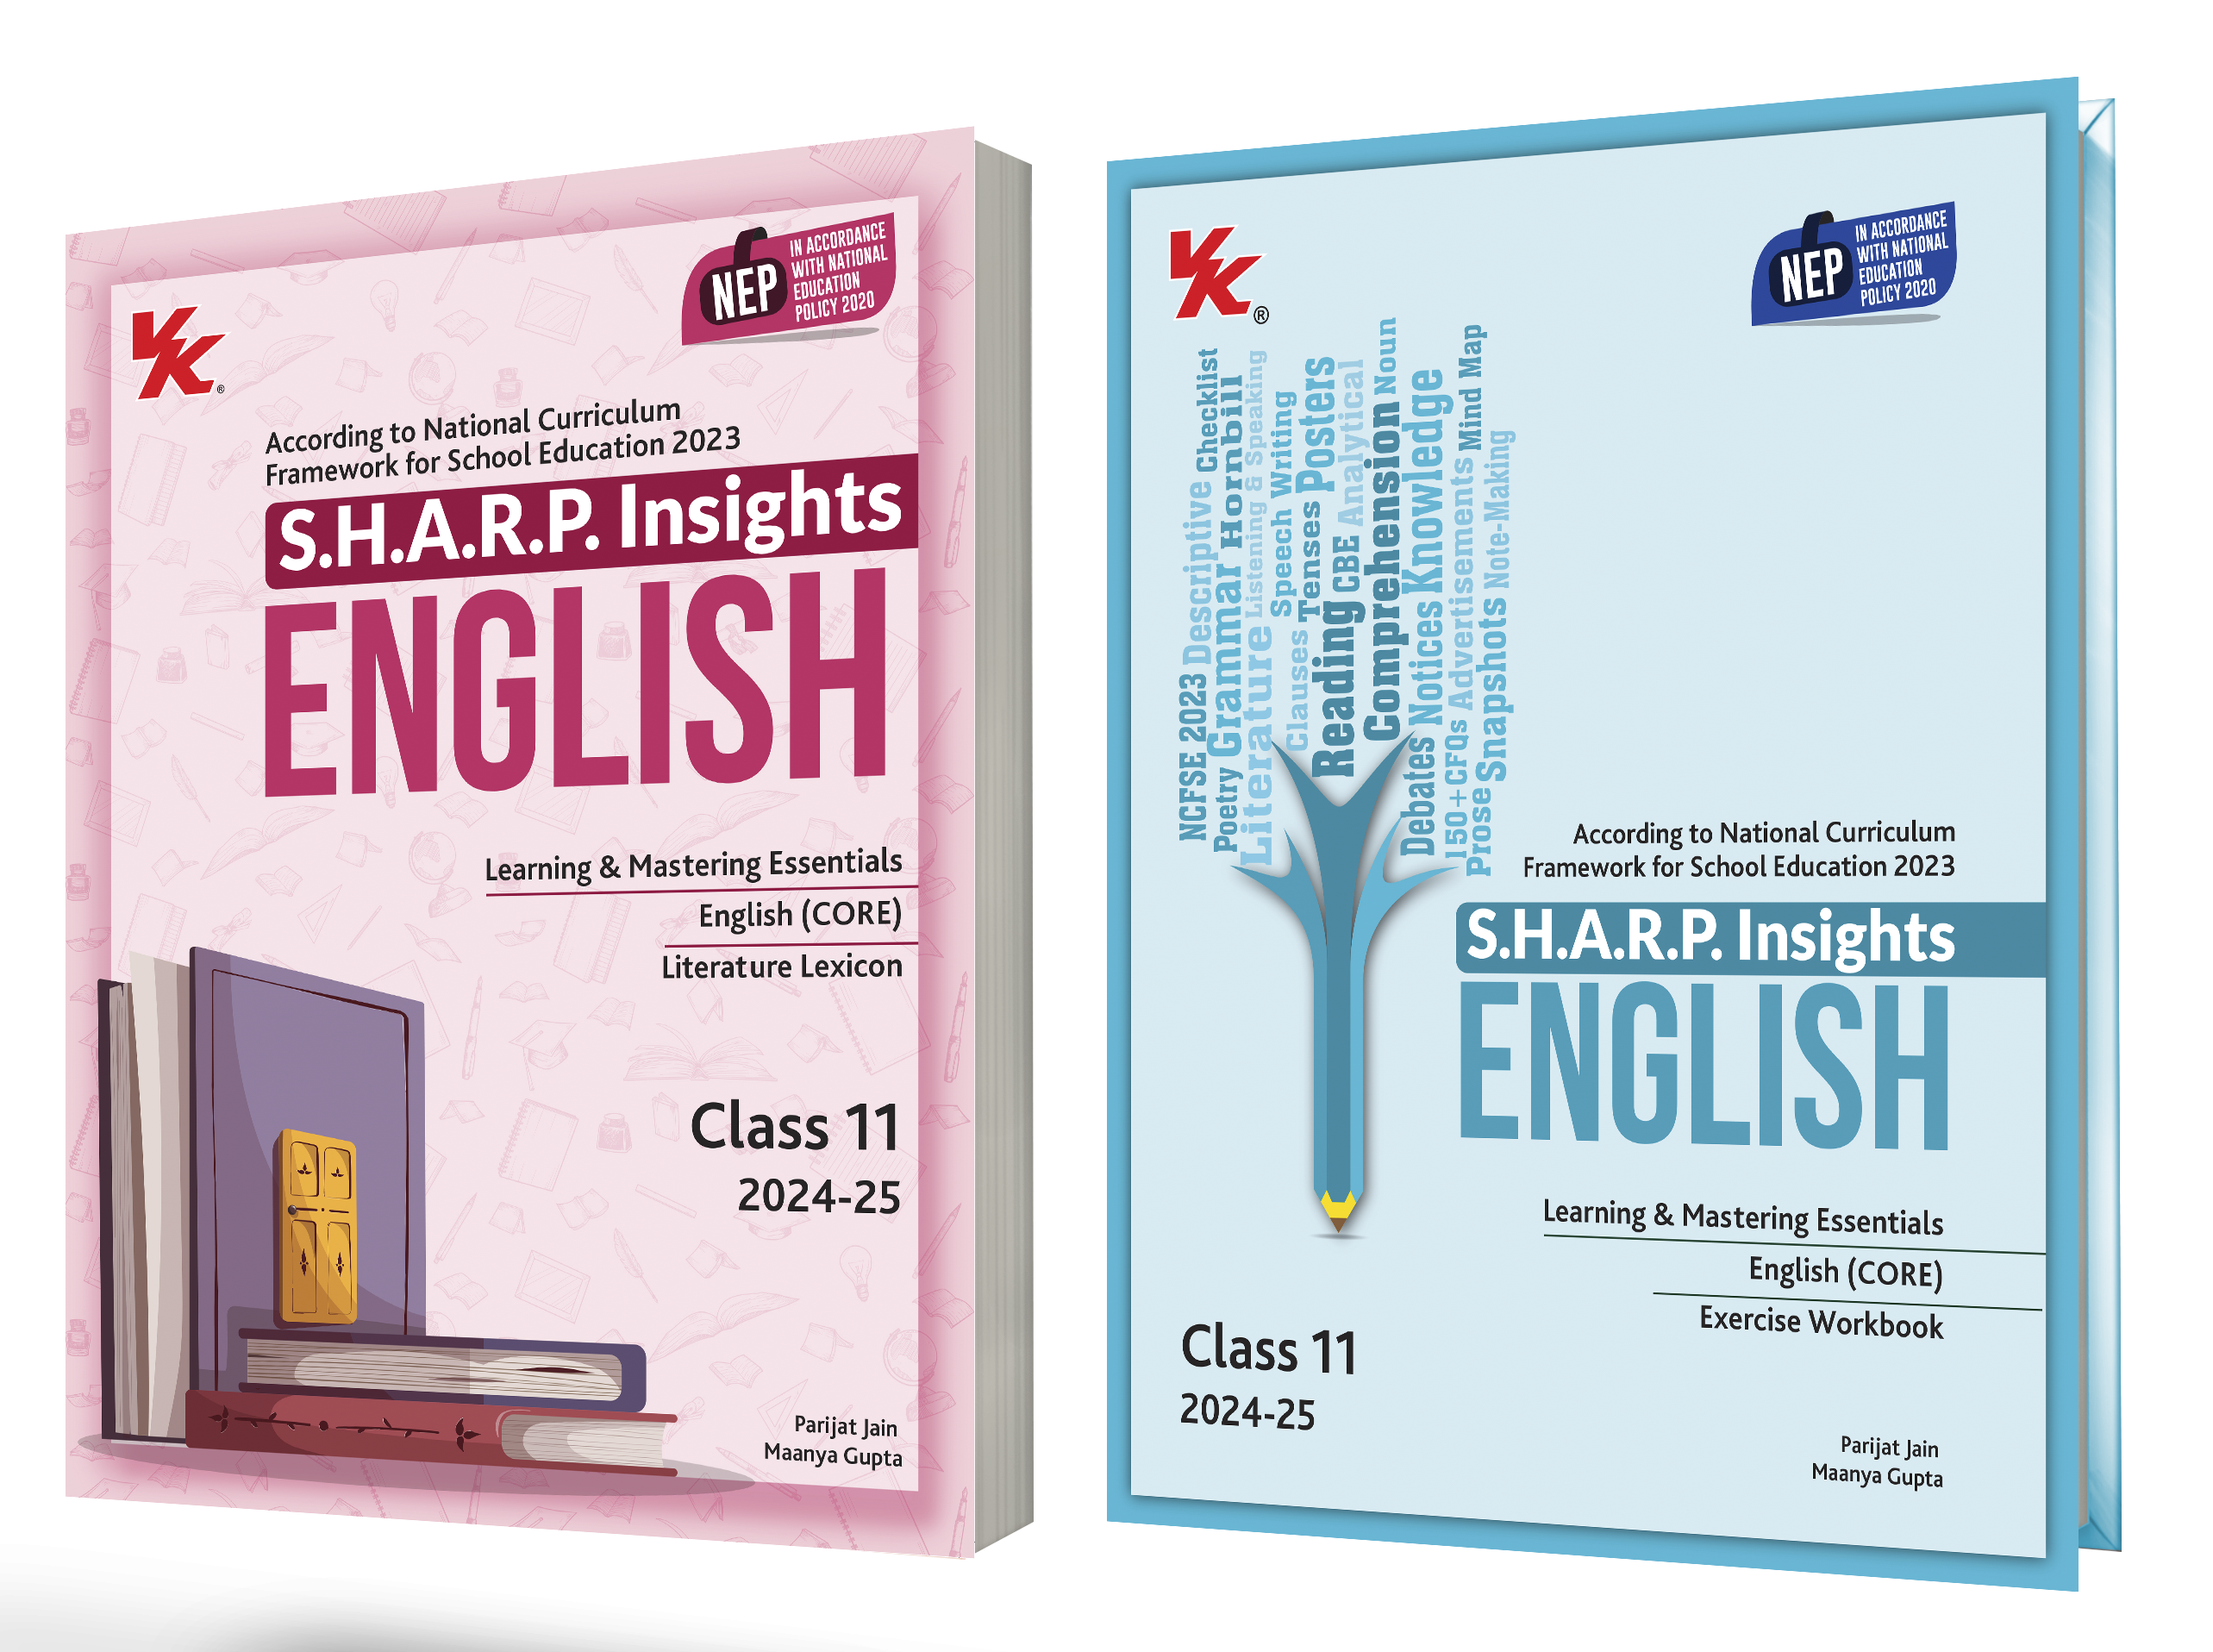 S.H.A.R.P. Insights for English (Core) Lexicon with Exercise Workbook for Class 11 CBSE 2024-25 (Set of 2 ) by Parijat Jain (IIT-D,IIM-A) & Maanya Gupta (IIM-A)